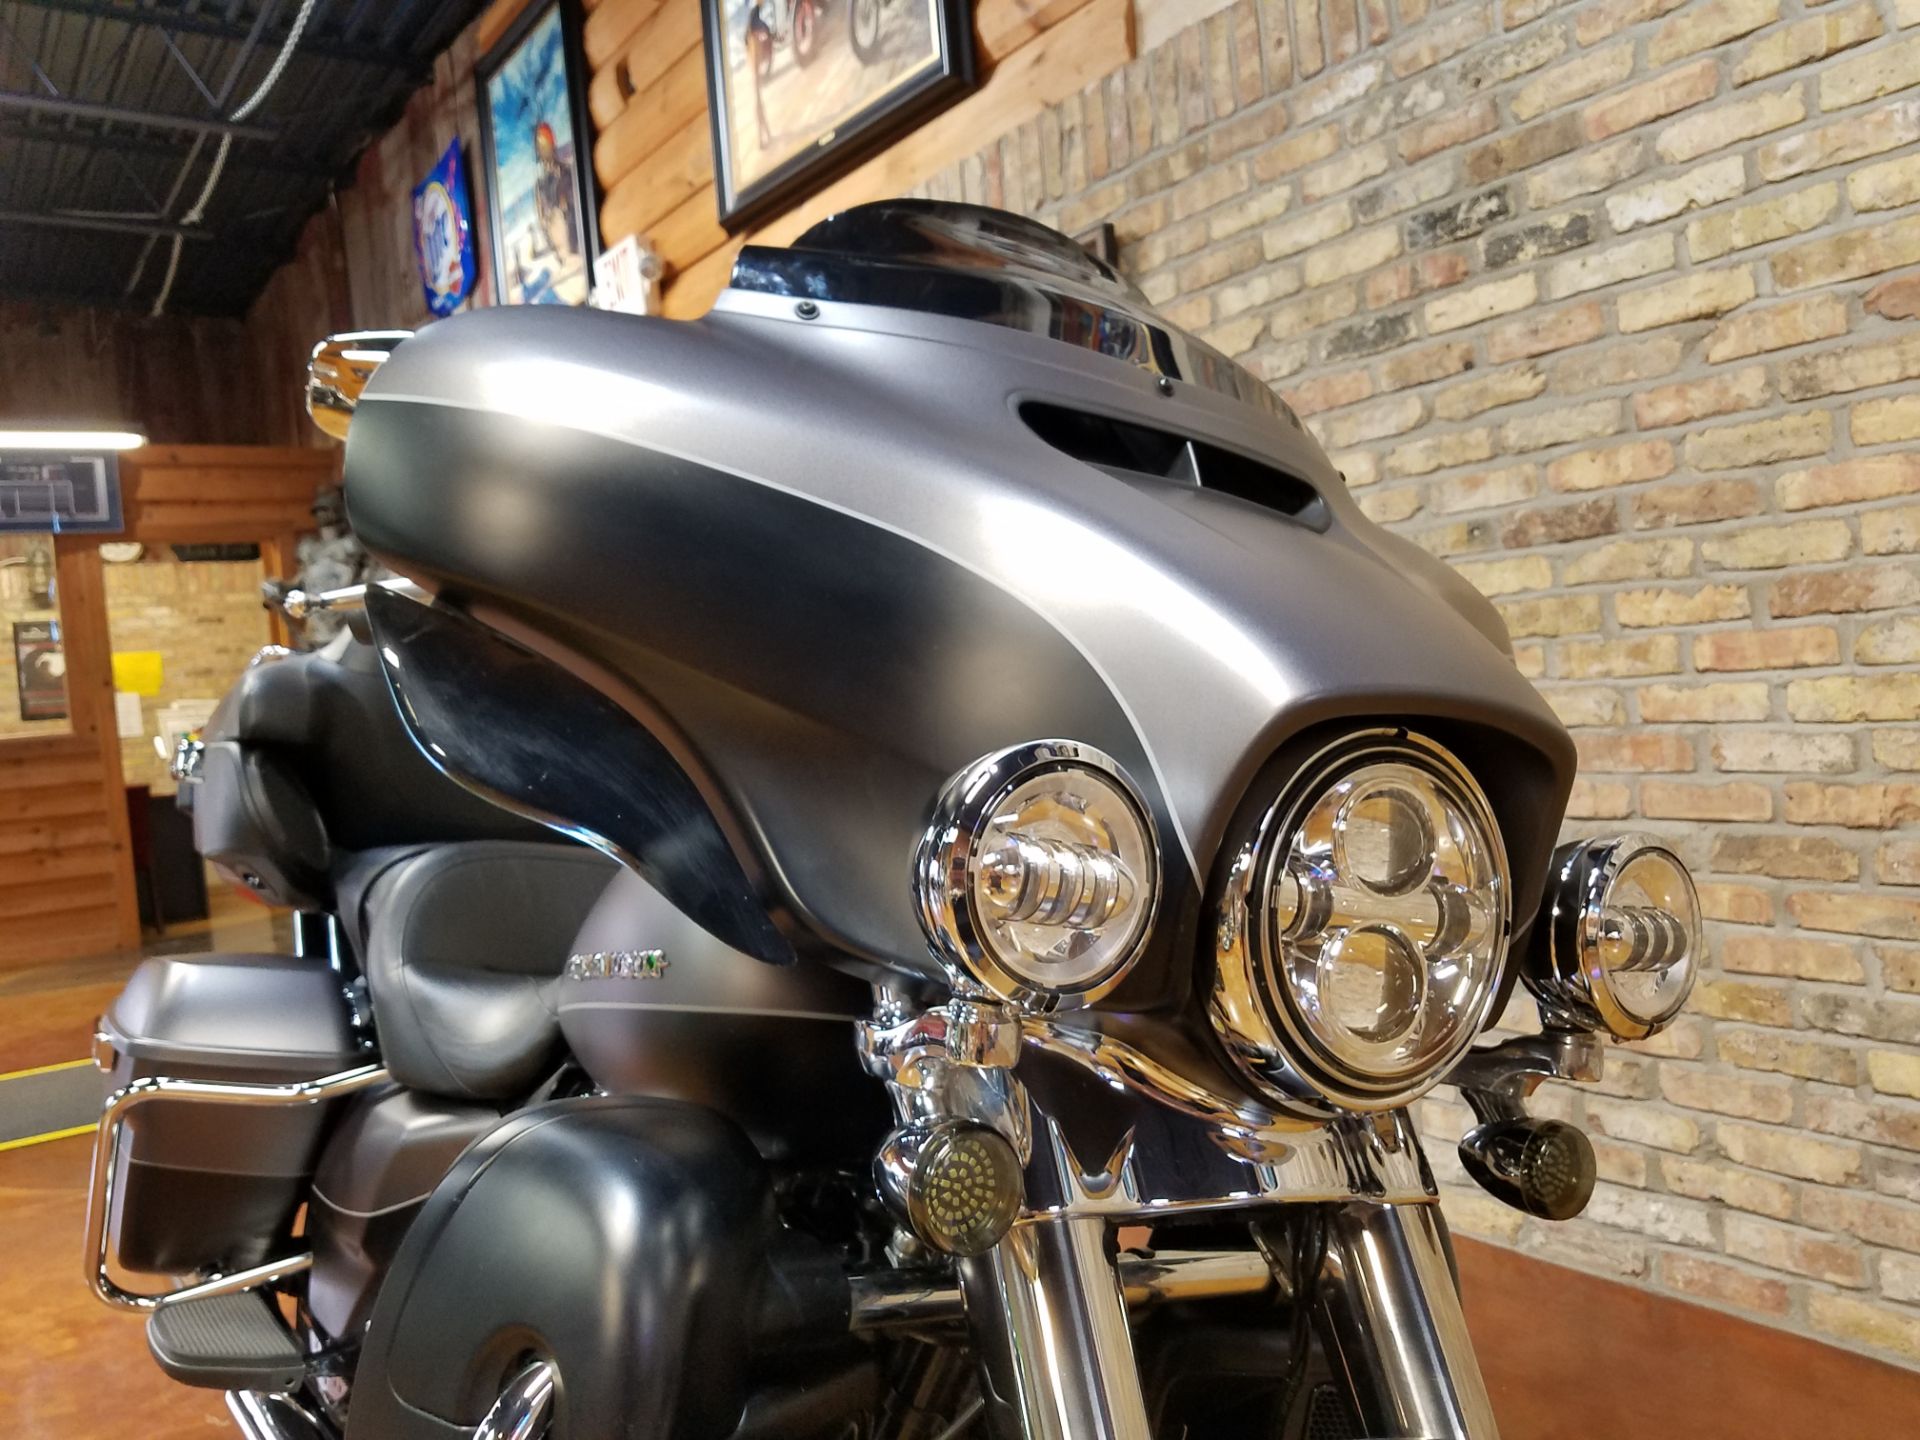 2017 Harley-Davidson Ultra Limited in Big Bend, Wisconsin - Photo 23